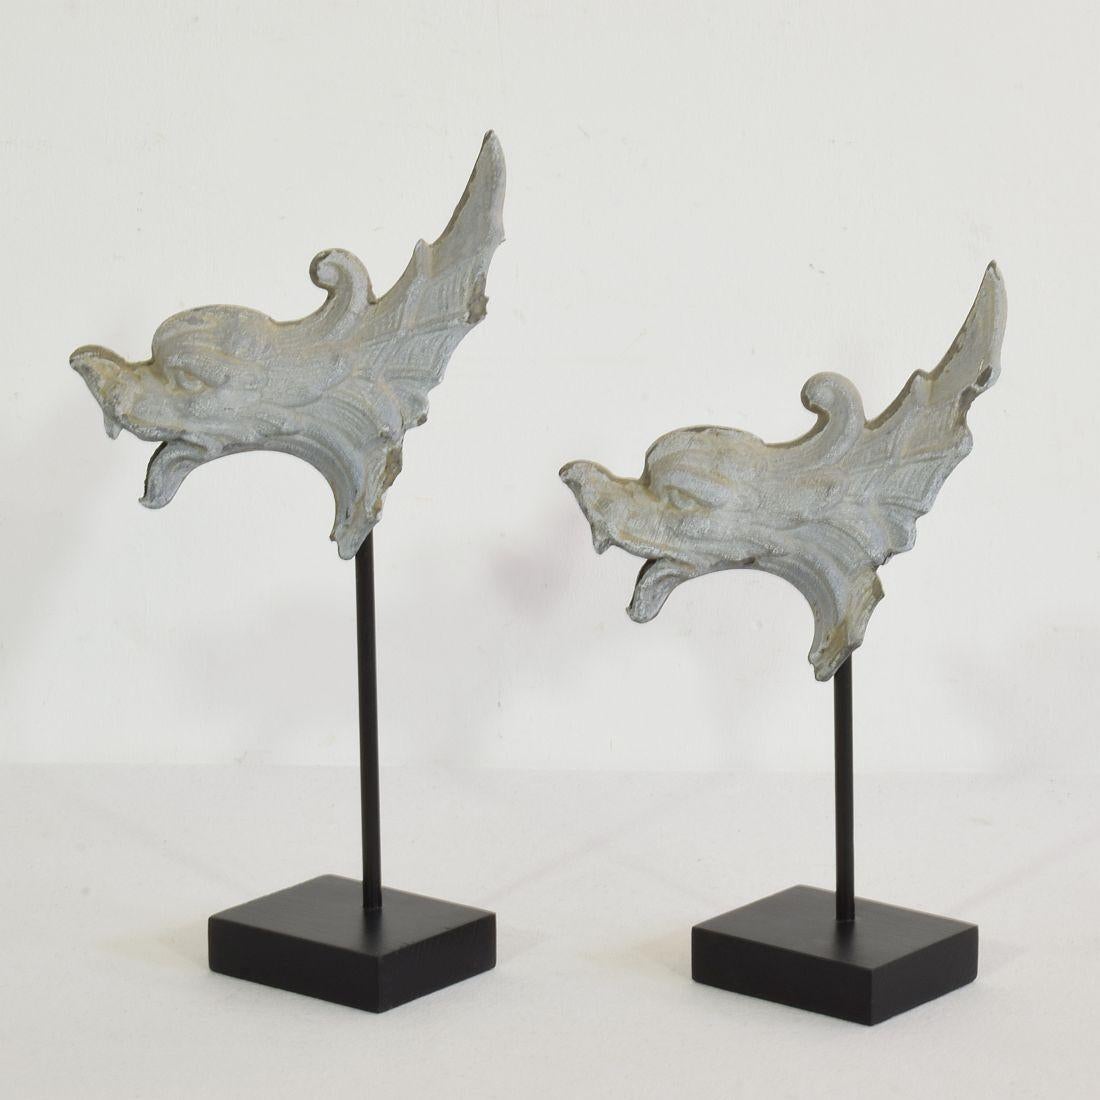 Belle Époque Pair of Small 19th Century French Zinc Roof Ornaments/ Gargoyles